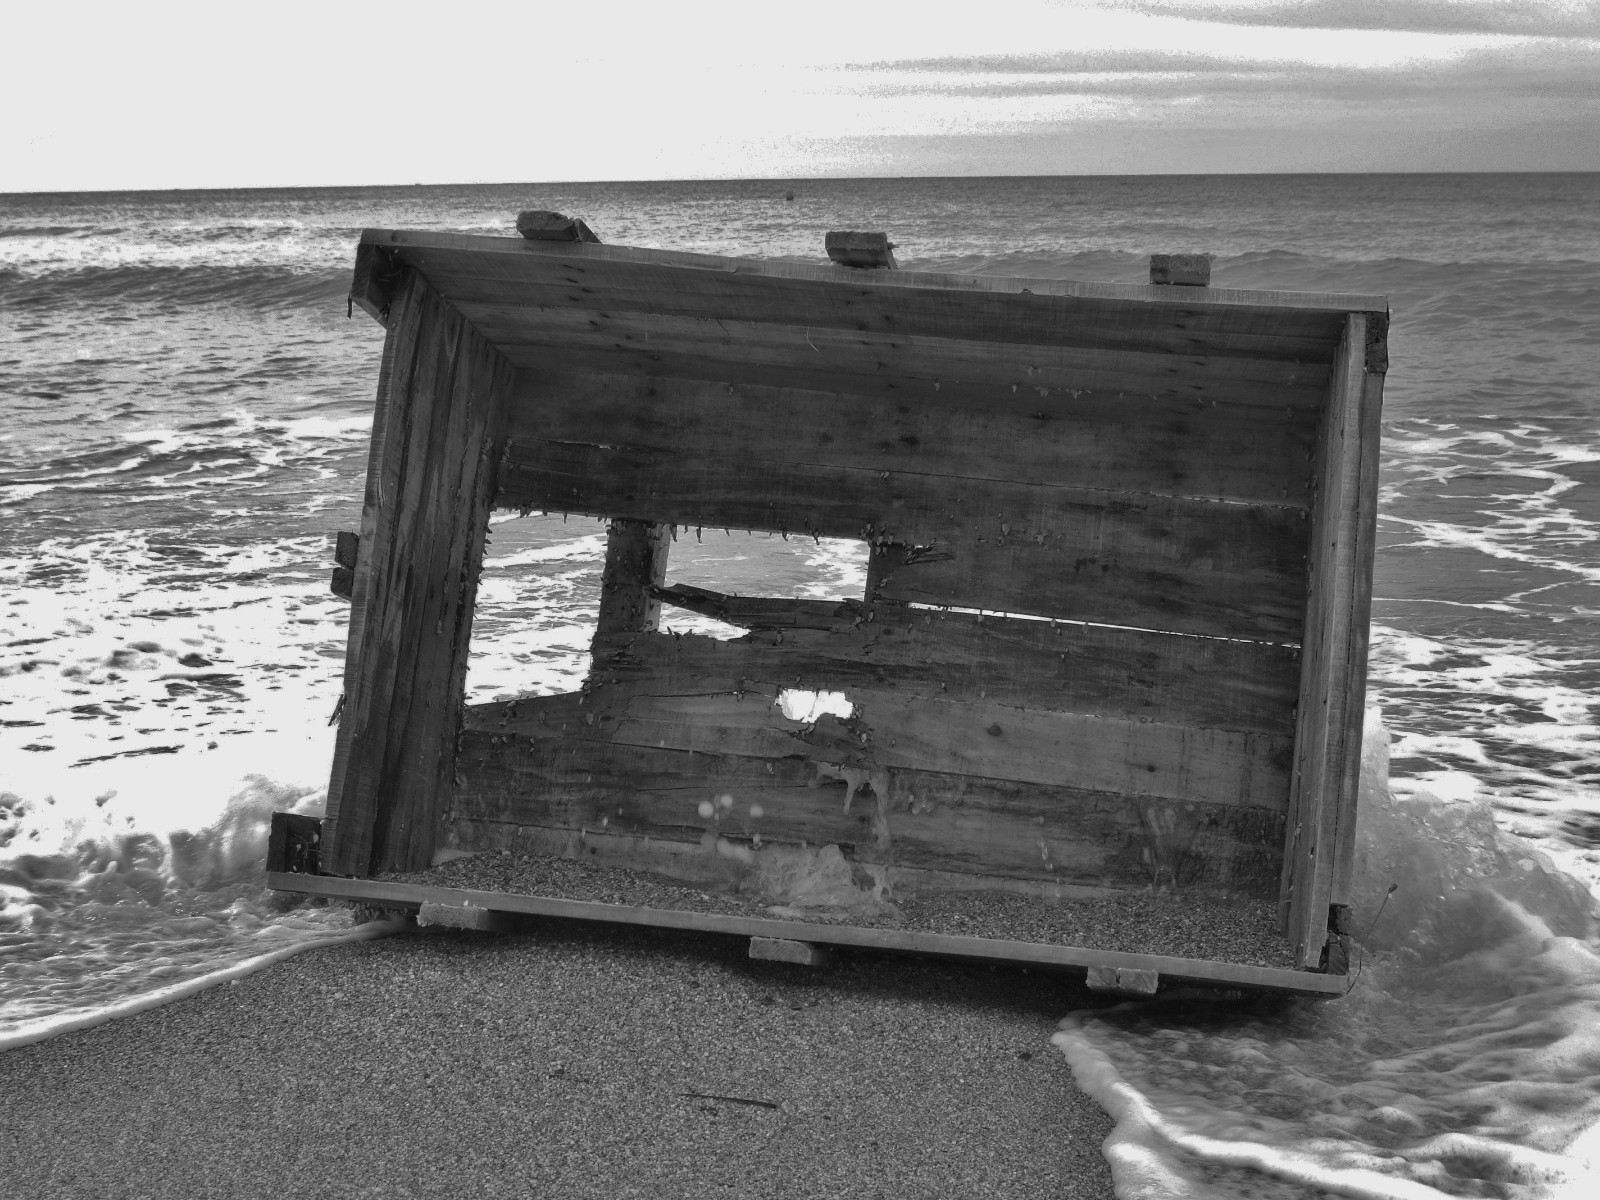 Shipwrecked crate, Wood | Sea | Ocean | Shipwreck | Ship | Surf | Beach | Sand | Water | Black | Black and White